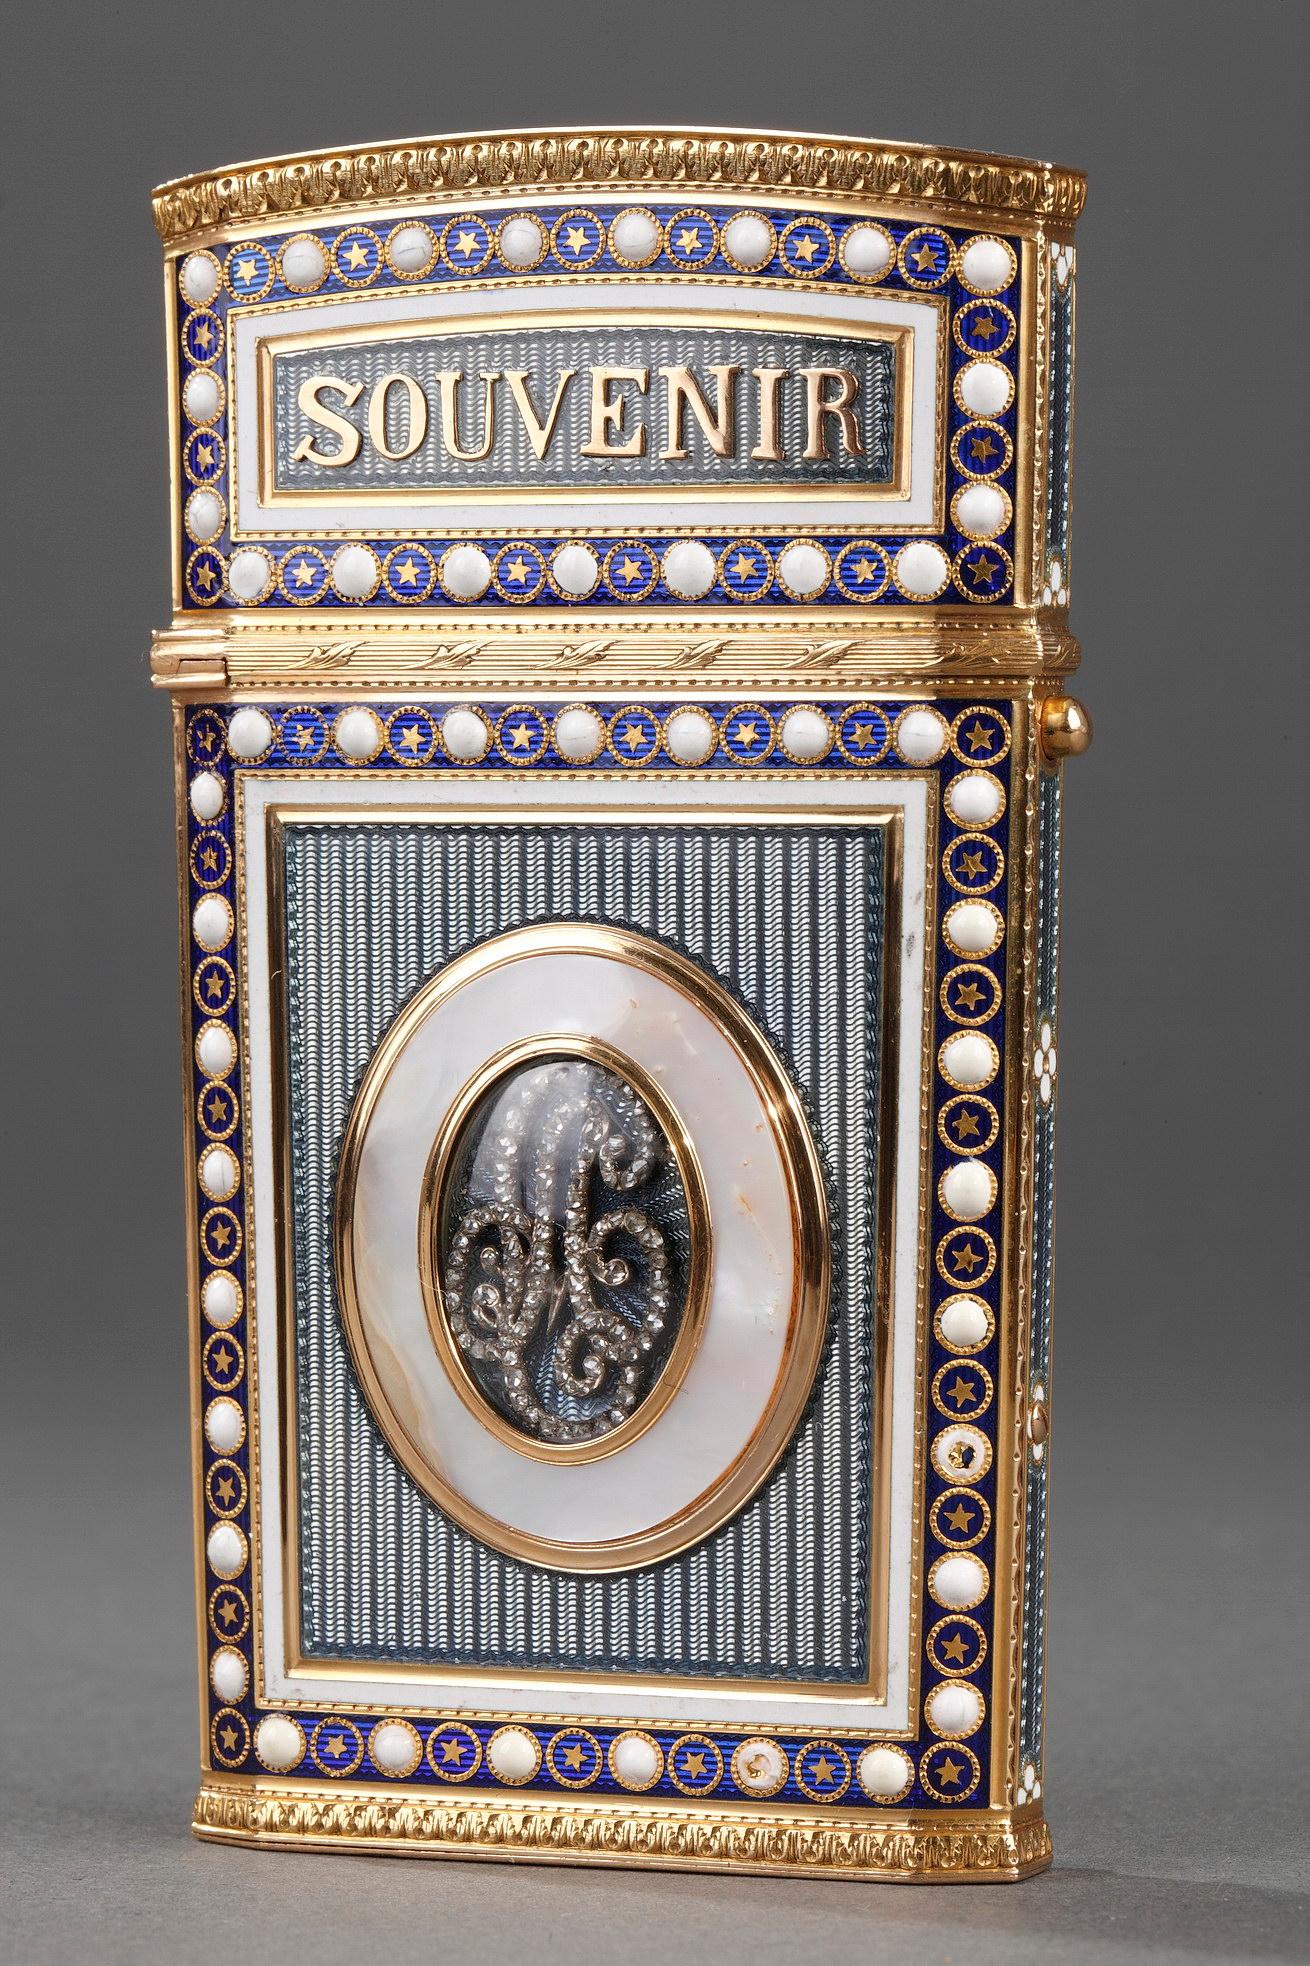 Rectangular writing supplies case with a slightly tapered base and gold mounting. The gold panels of the case are decorated with thin, parallel stripes and overlaid with translucent, lavender blue enamel. A button serves to open the hinged lid which